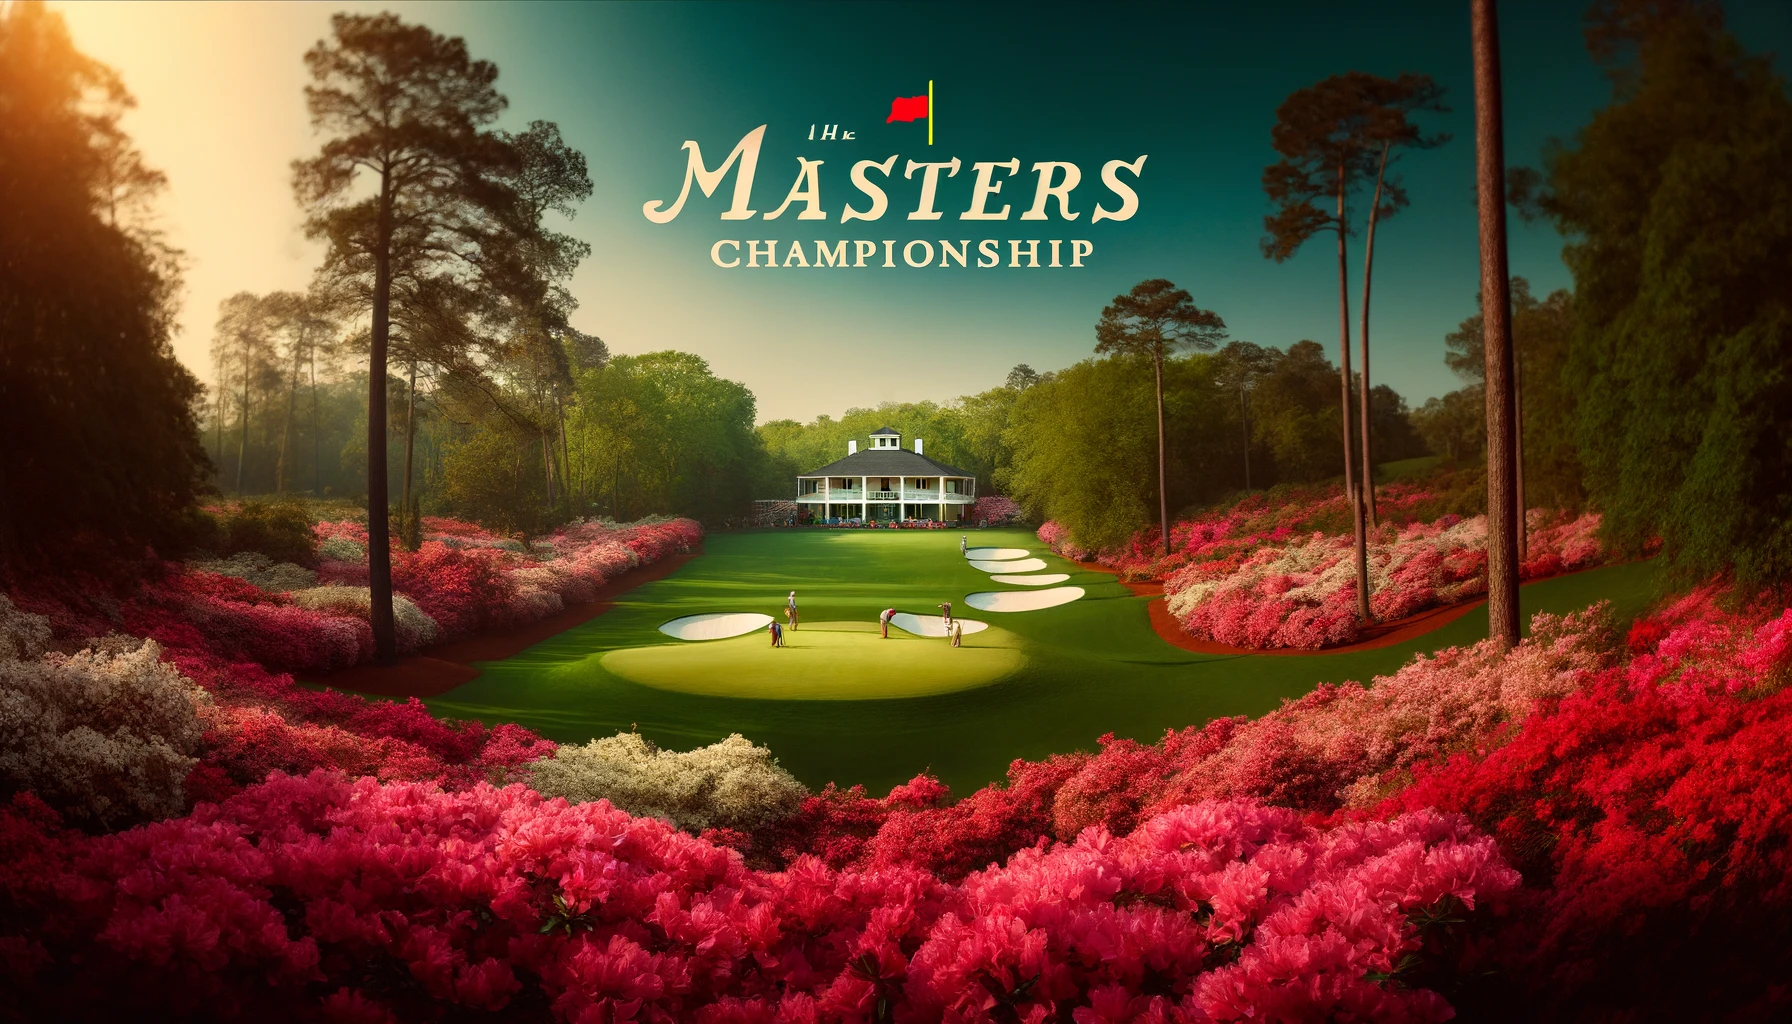 The Masters Championship